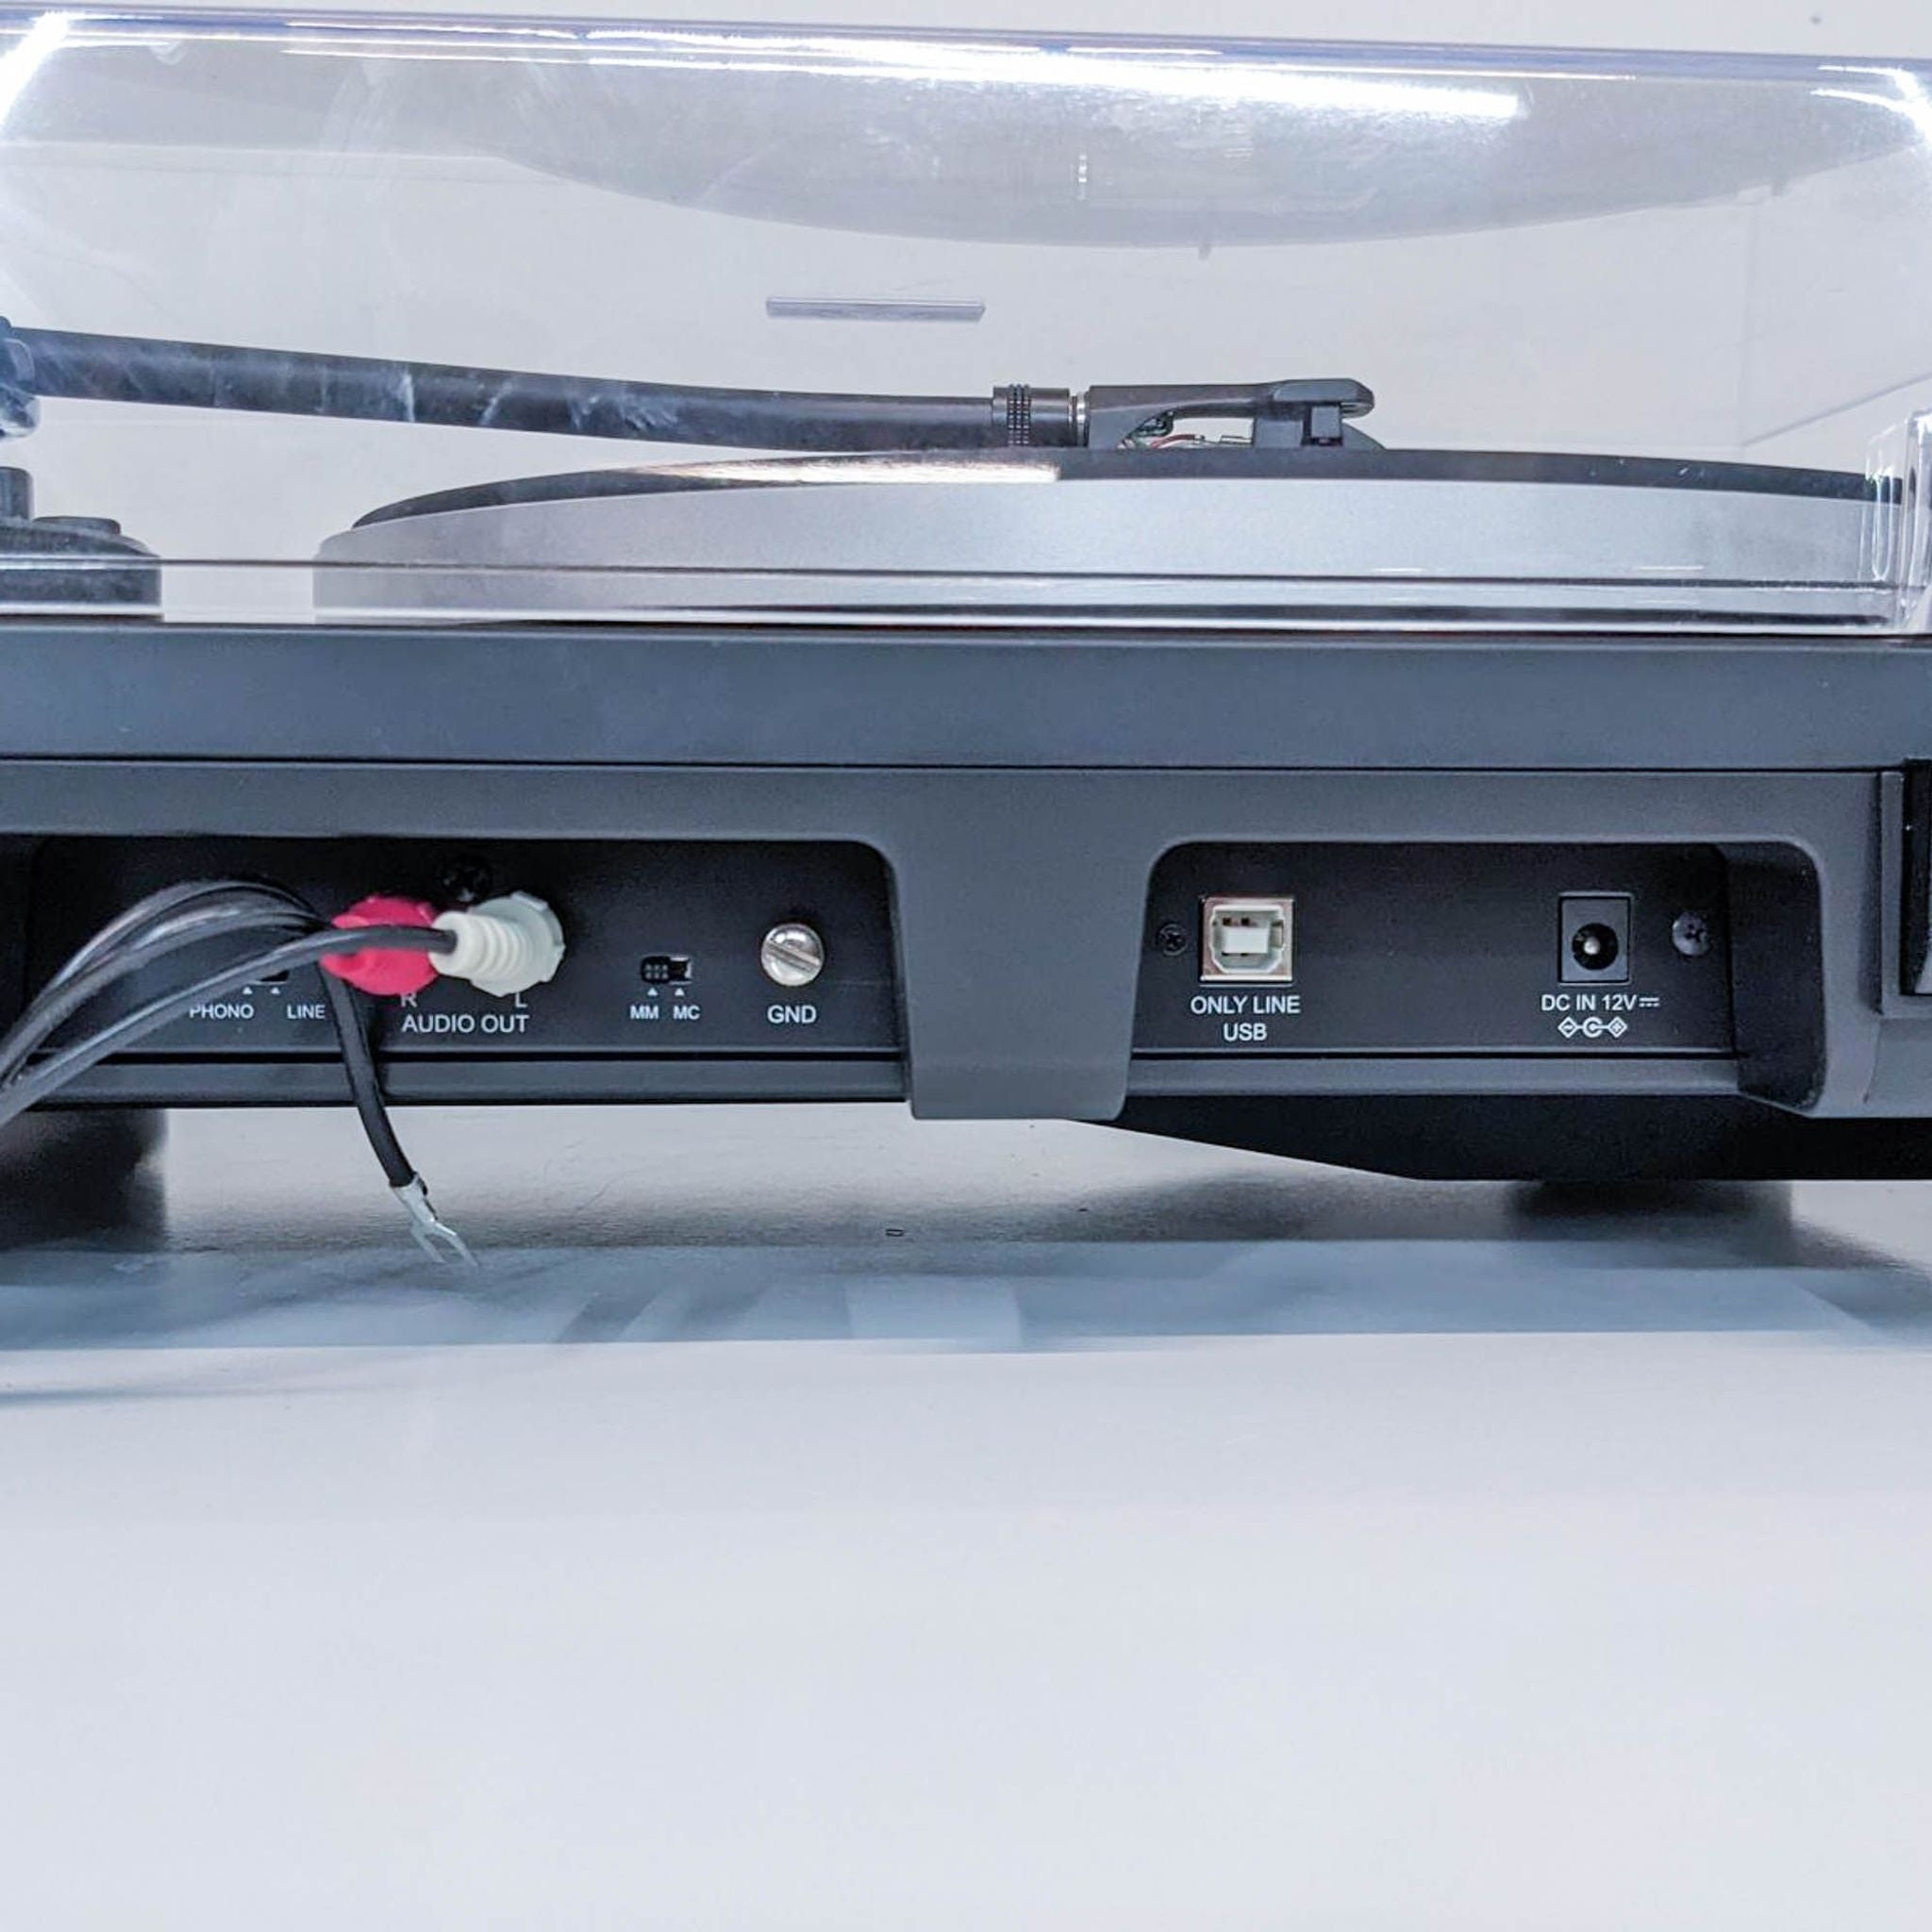 Rear view of an Audio-Technica turntable showing audio outputs, a USB port, and power connector.